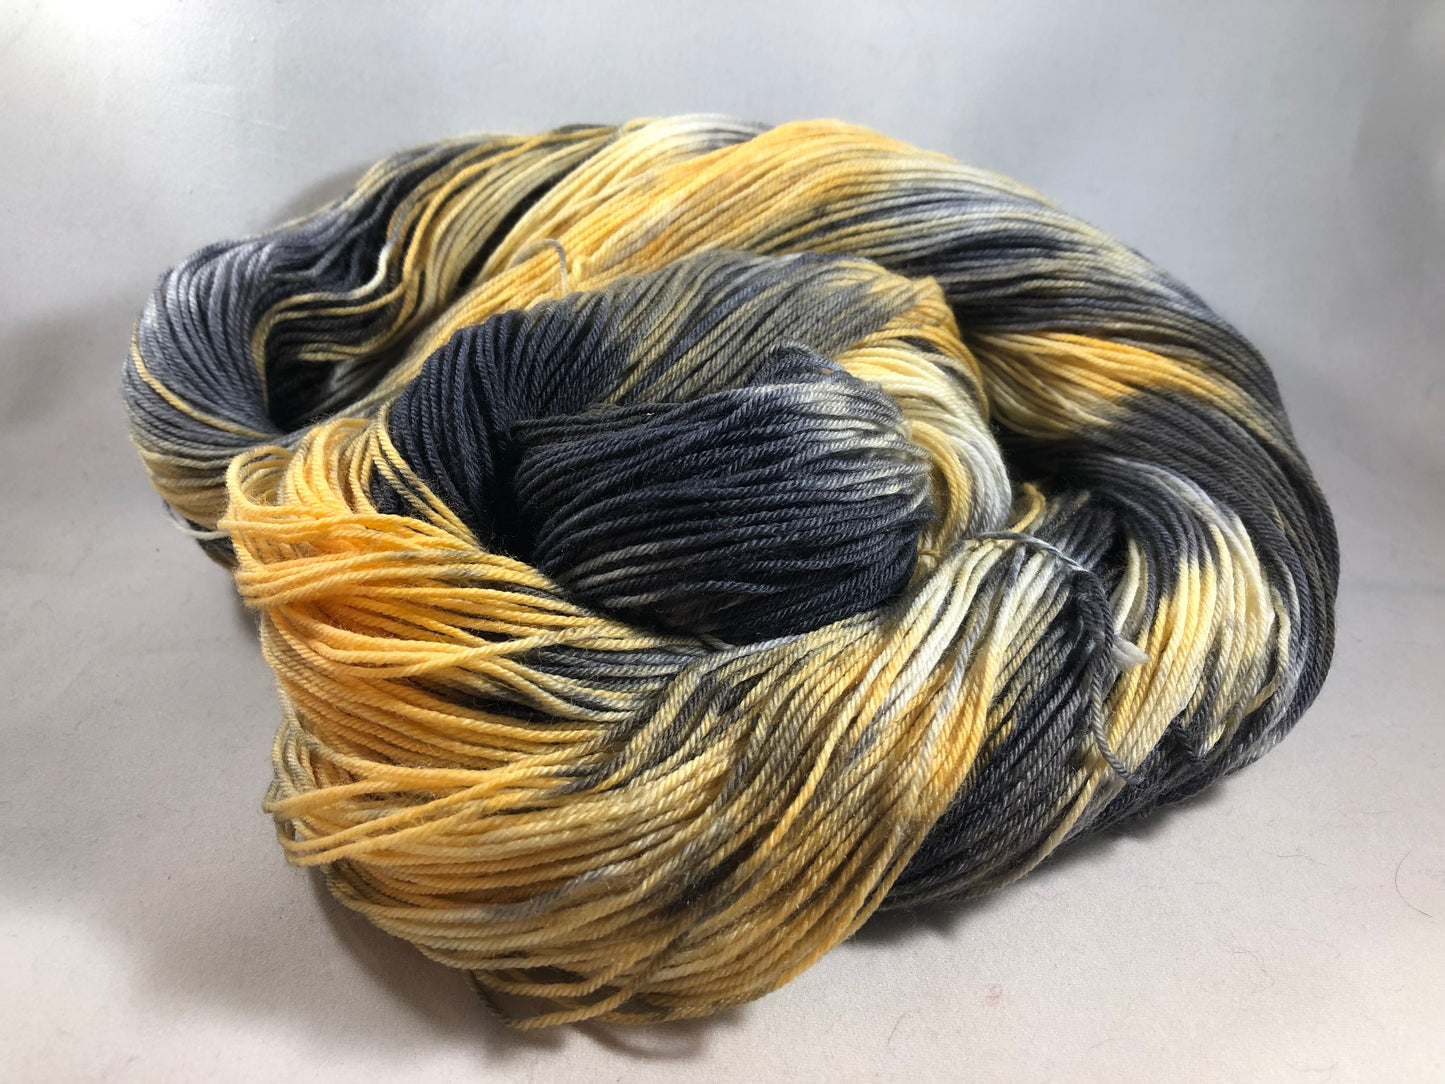 DISCONTINUED - Mummy's Twist - Ready to Ship